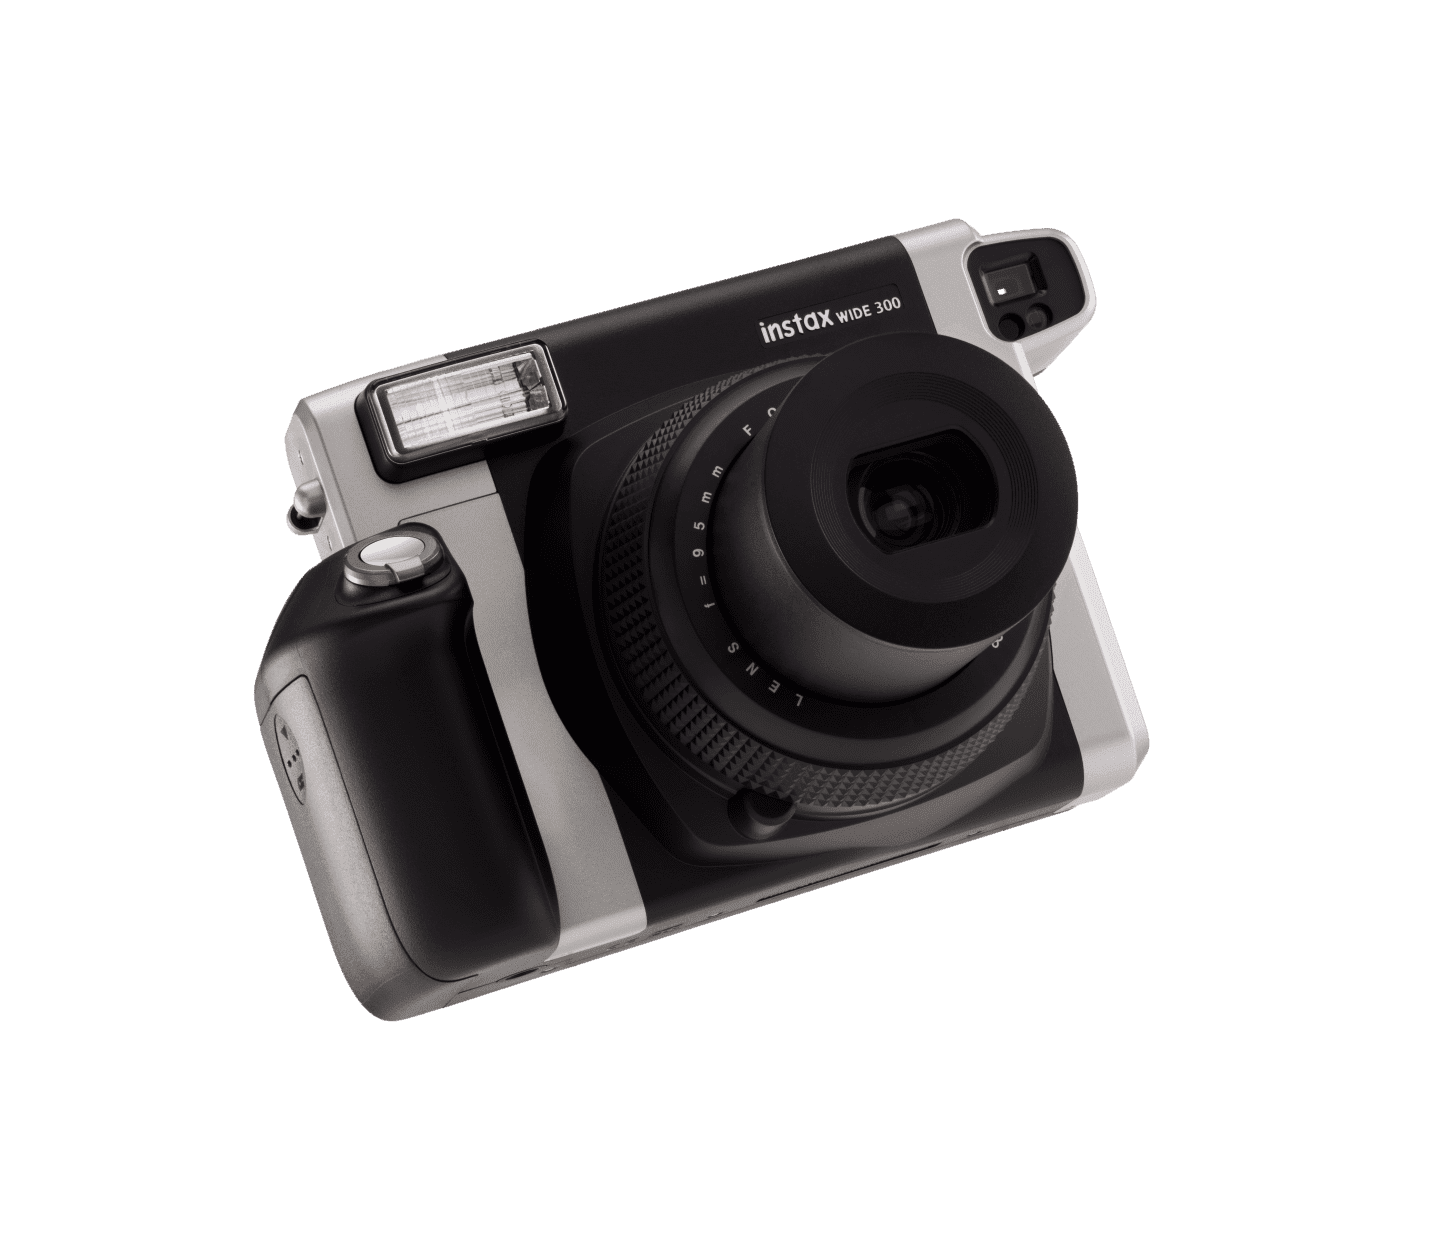 WIDE 300 Instant by Camera instax Photography | Fujifilm